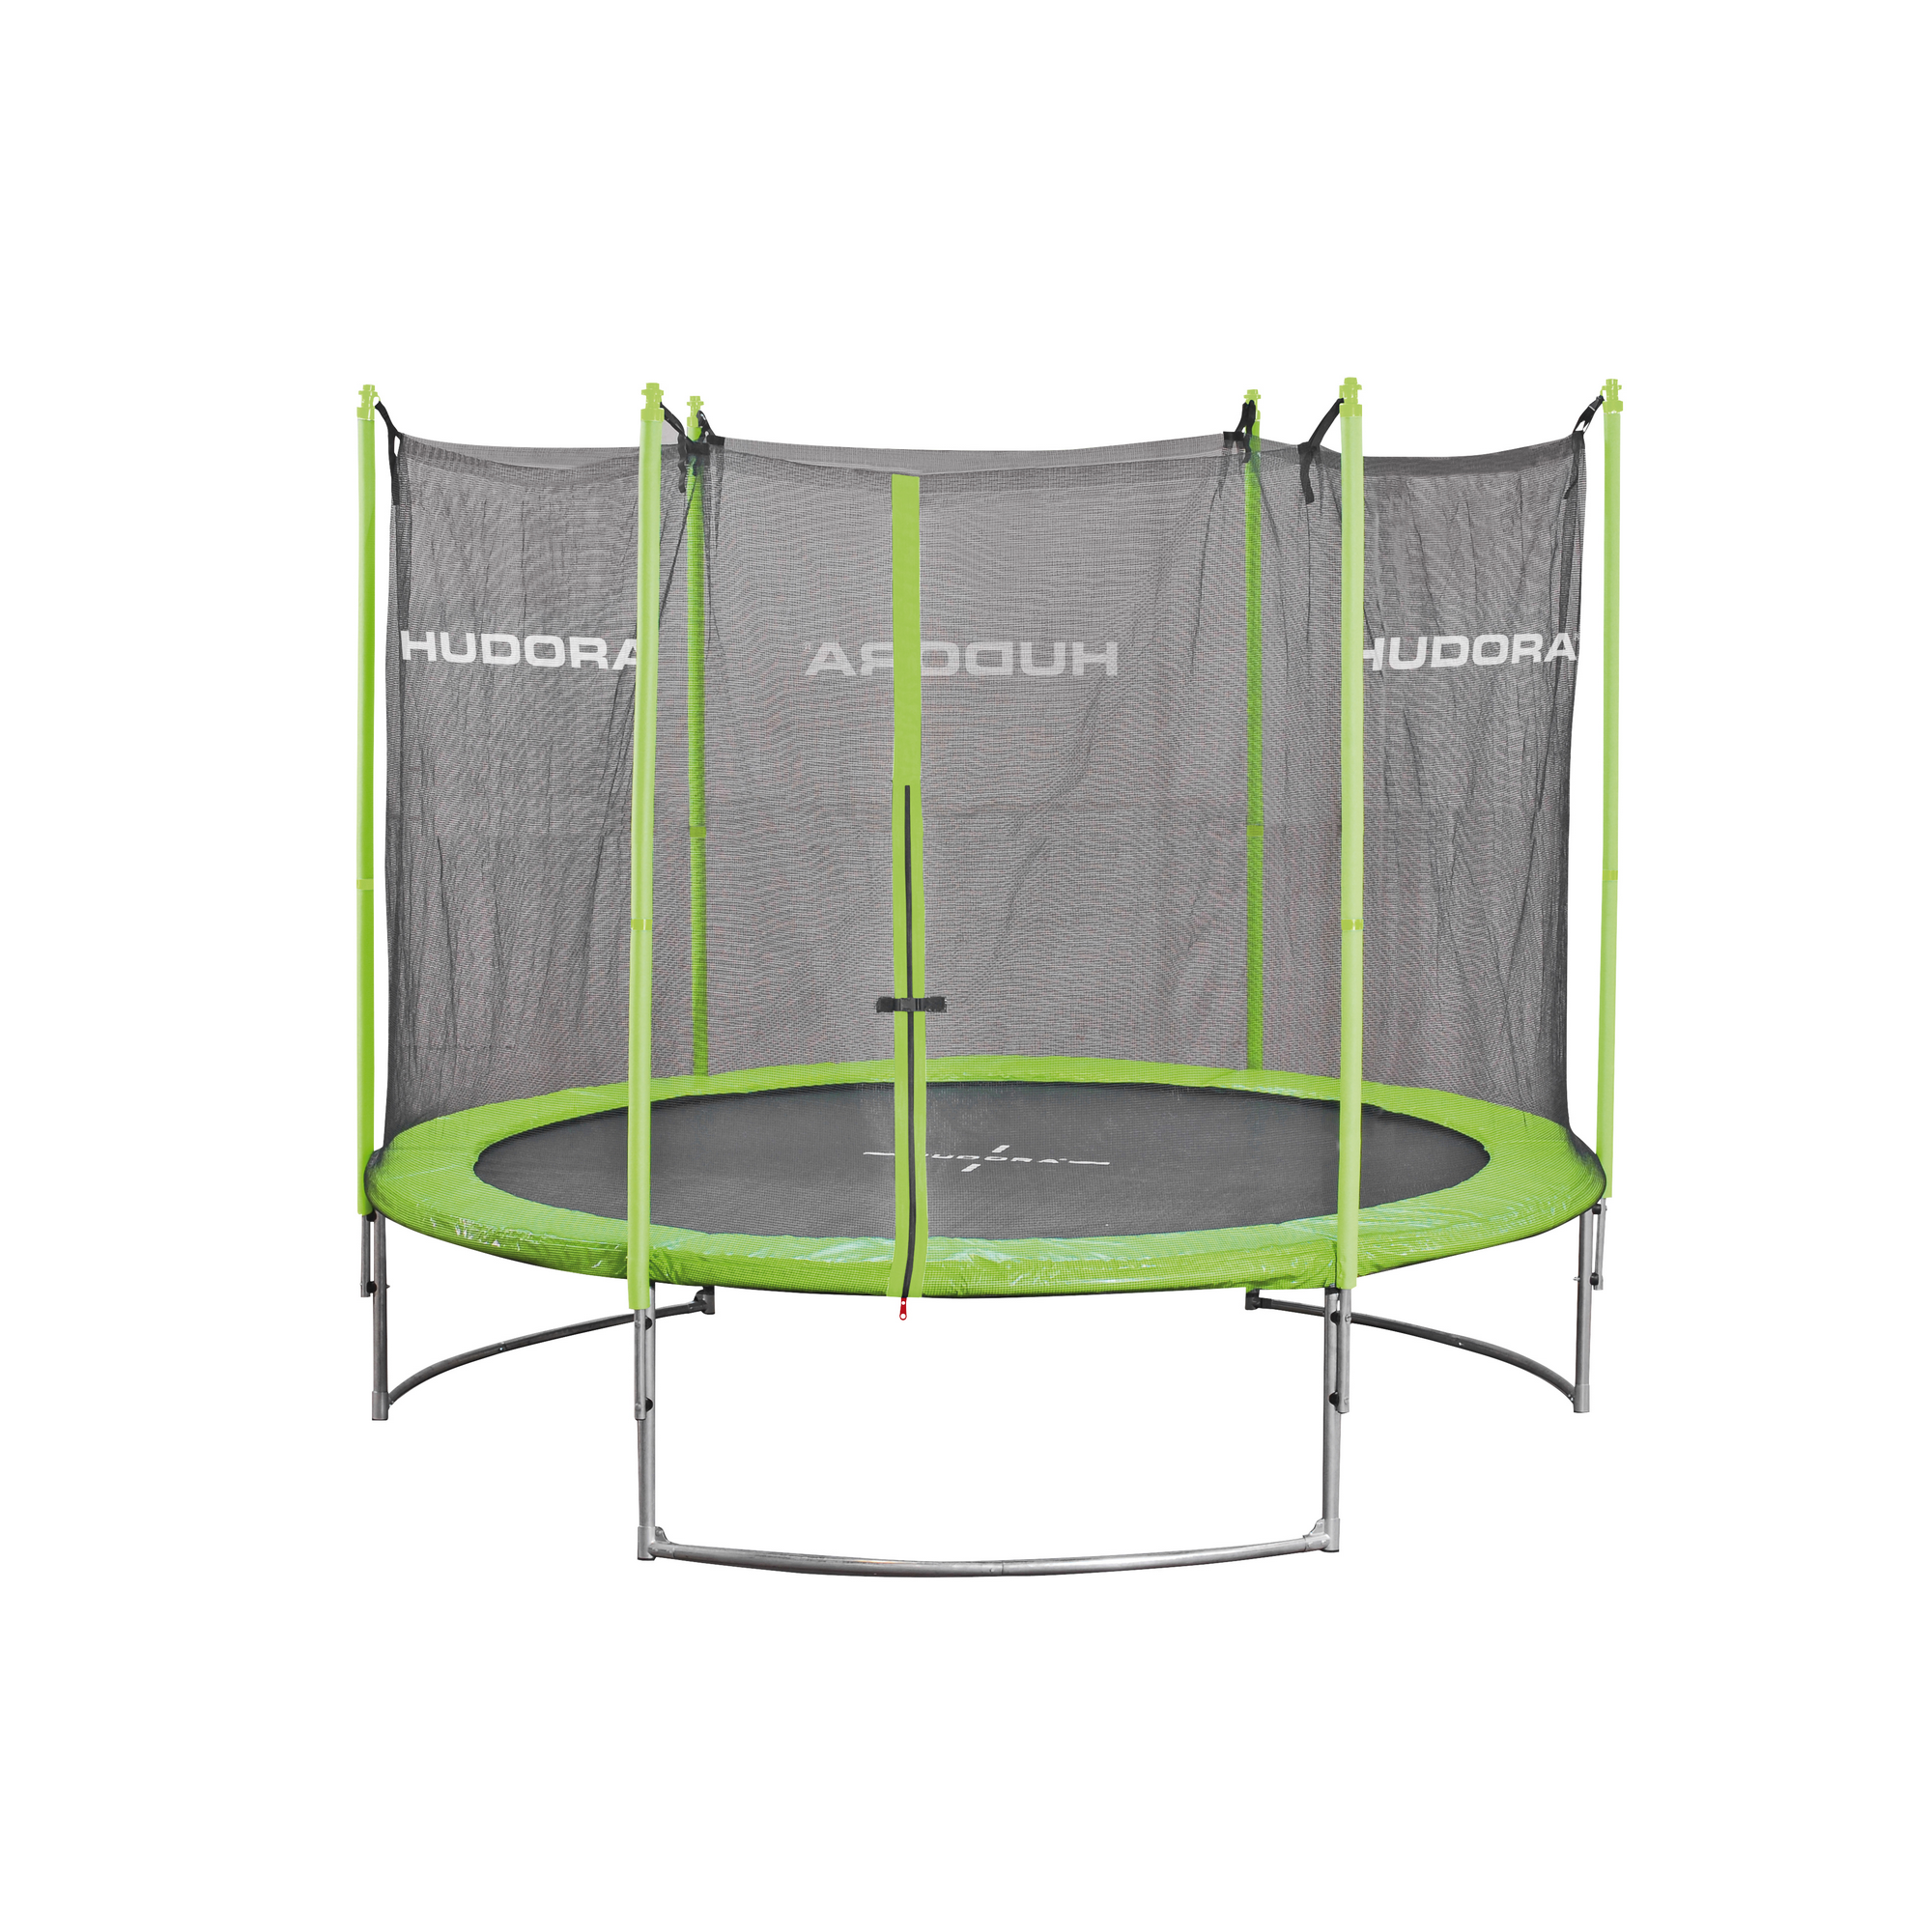 Family Trampolin 300 cm grün + product picture